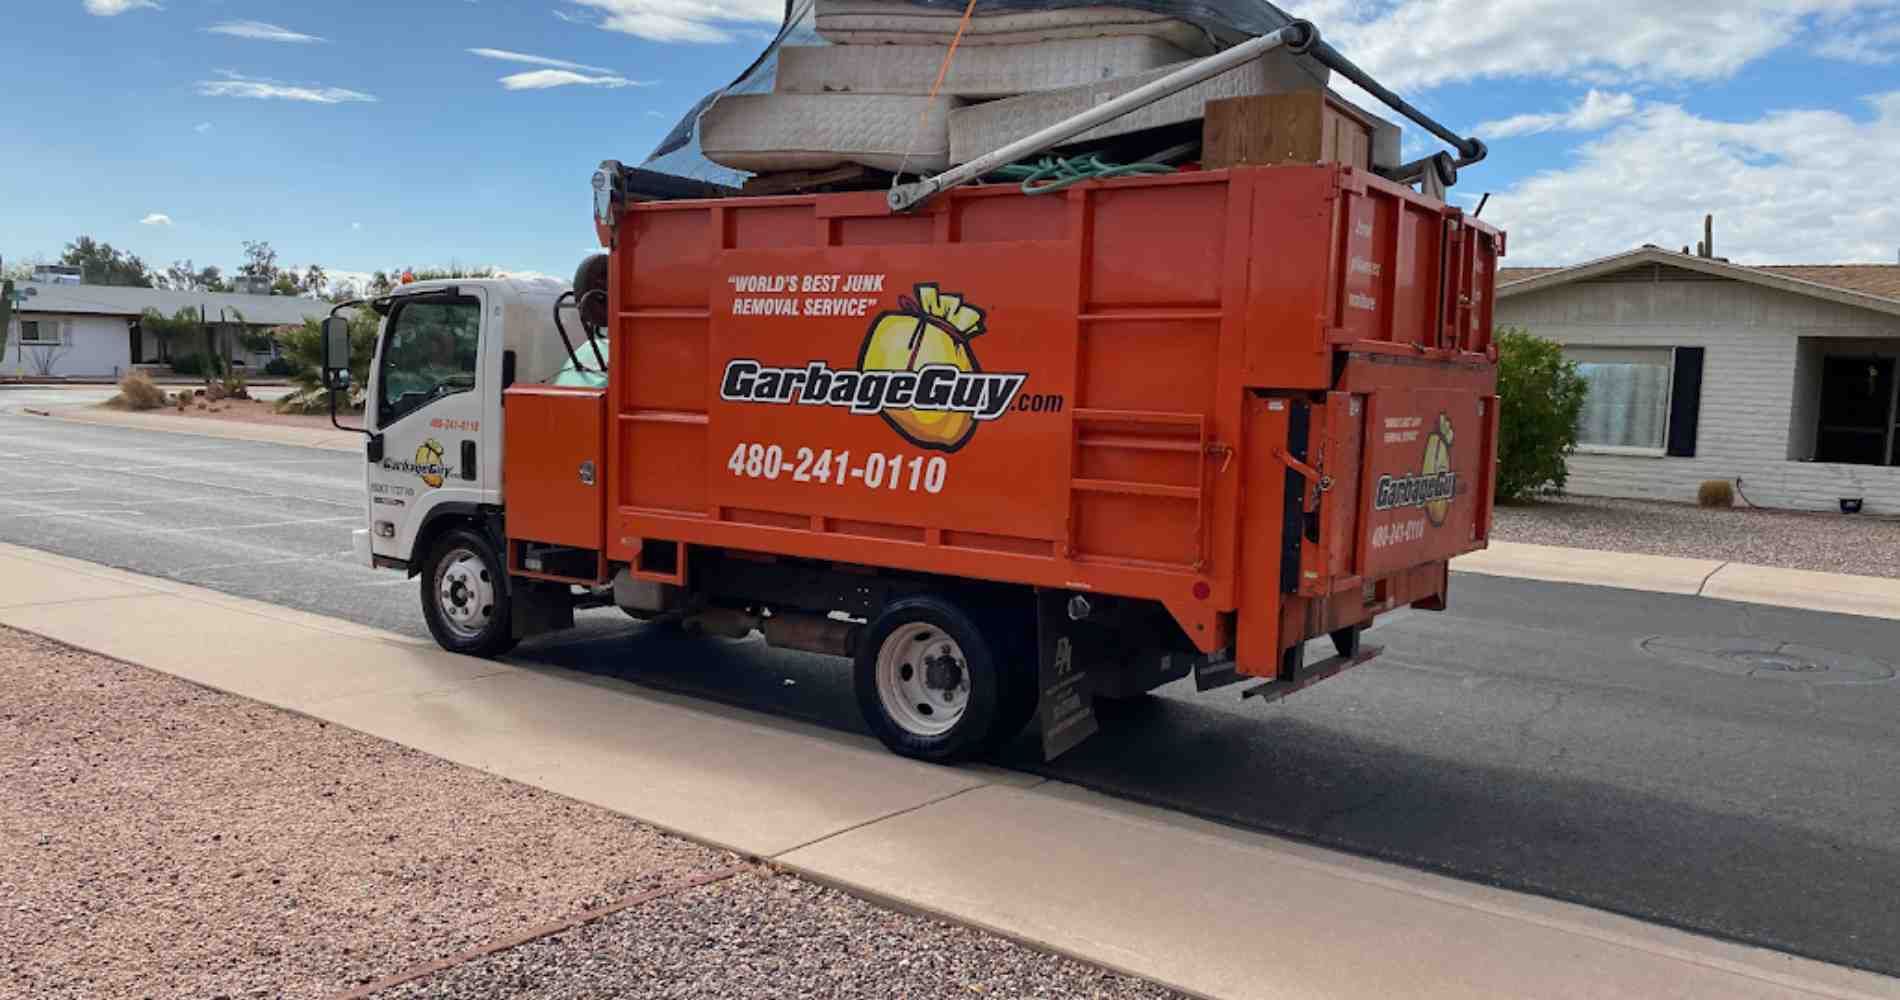 #1 for Curbside Trash Pickup in Waddell, AZ with Over 1200 5-Star Reviews!